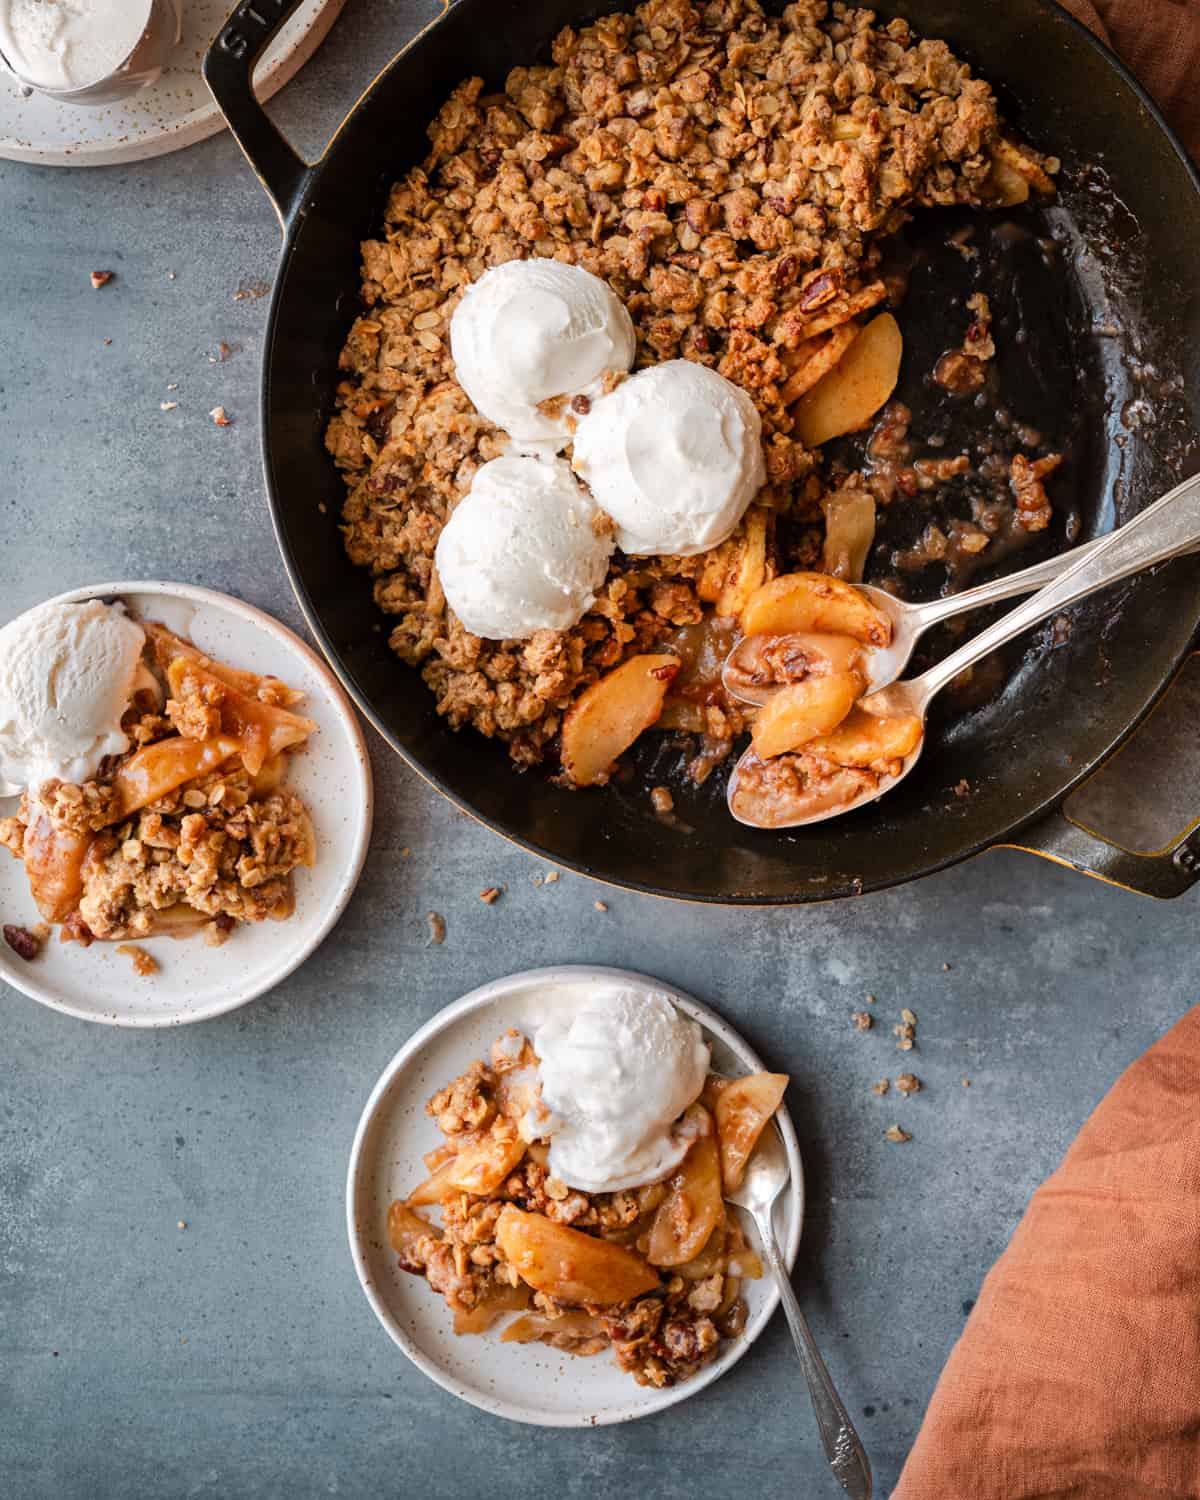 Two plates of apple crisp with ice cream next to skillet of apple crisp on a table.